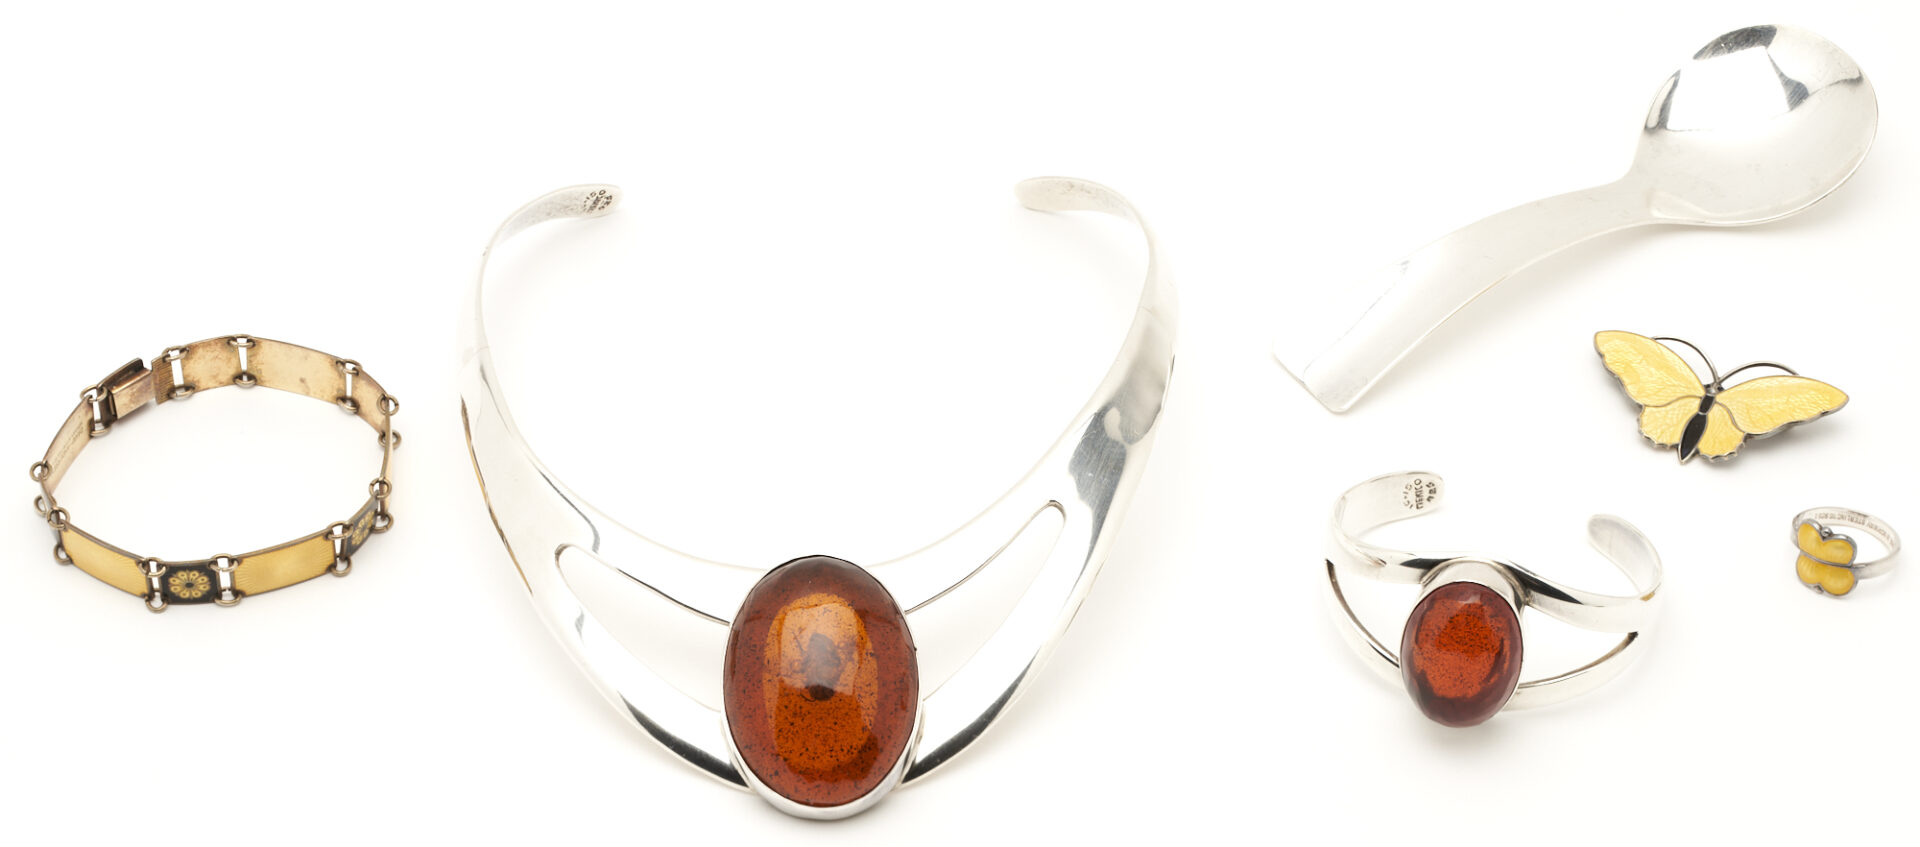 Lot 763: 6 pcs. Ass. Sterling Silver, incl. David-Andersen Enameled & Mexican Baltic Amber Jewelry